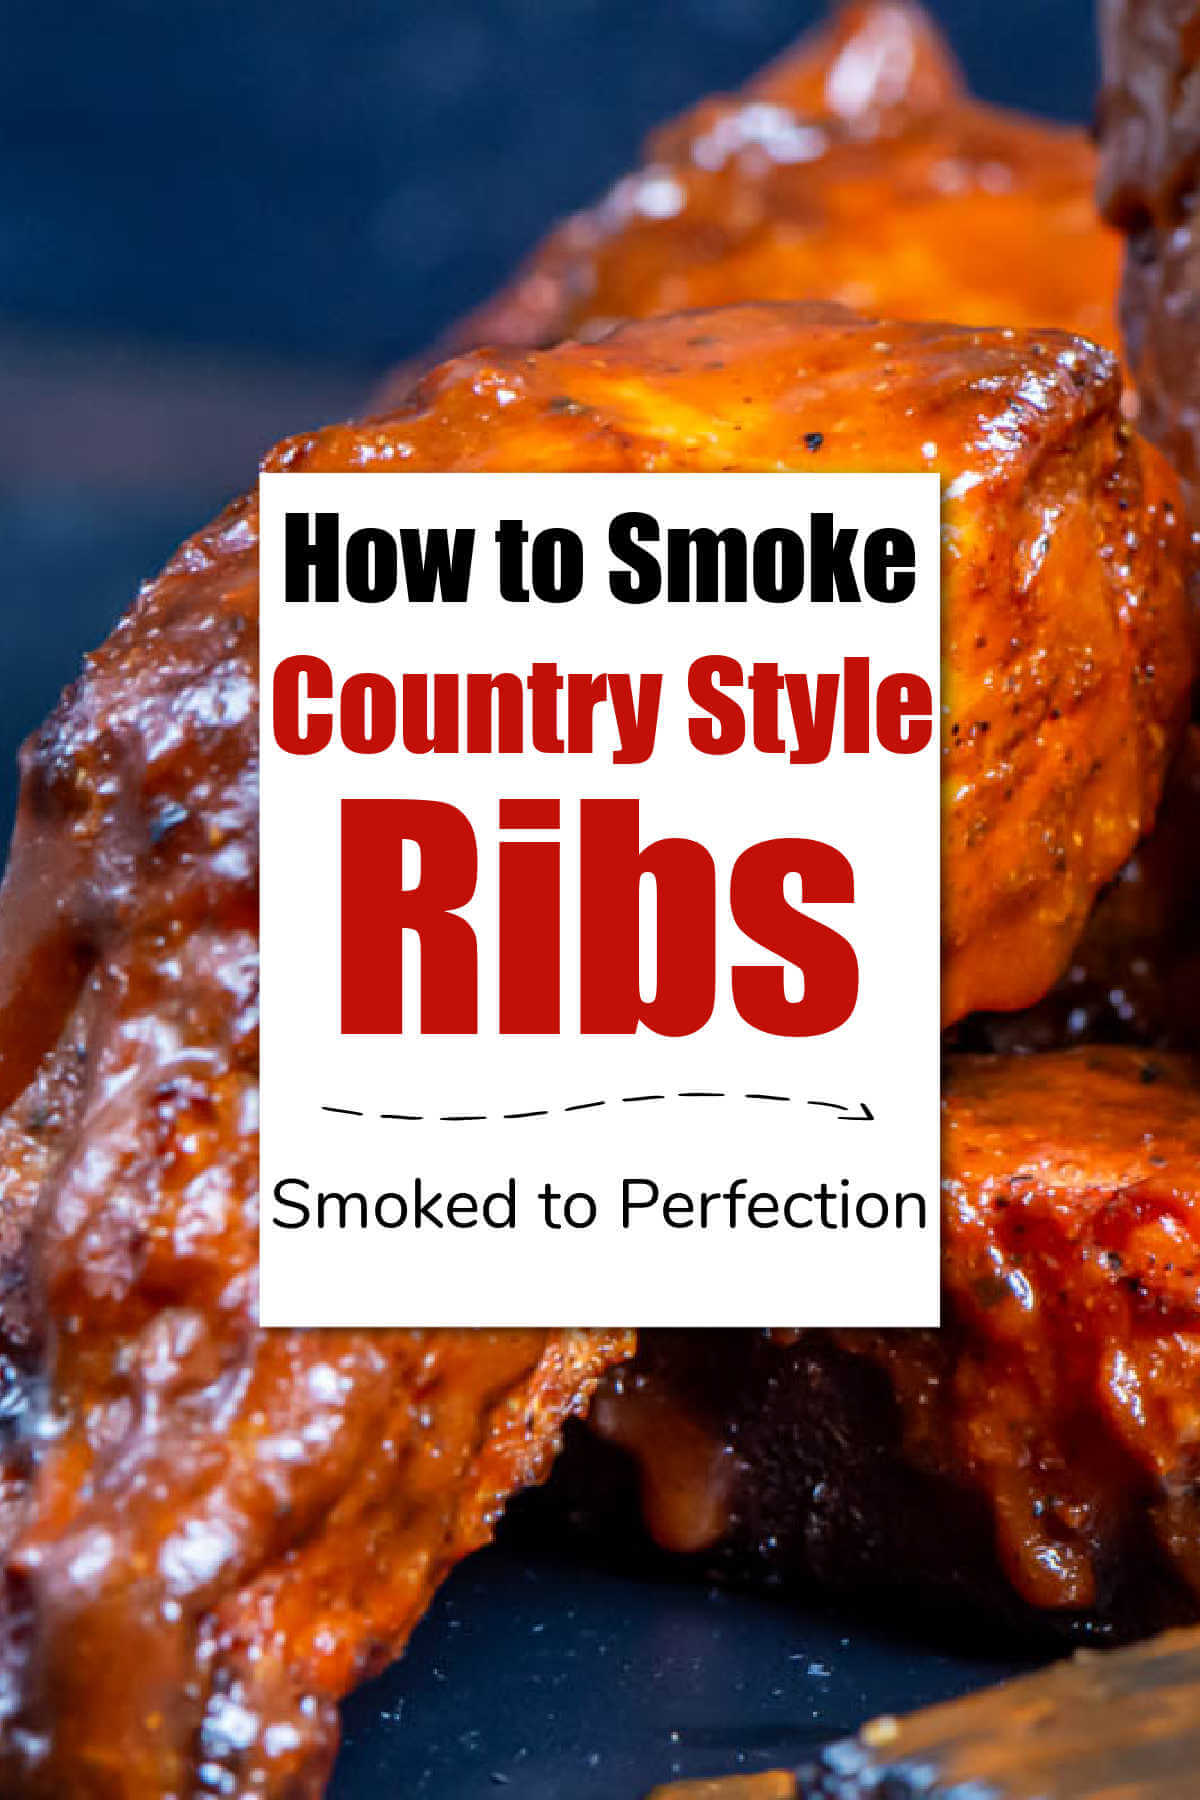 Smoked Country Style Ribs